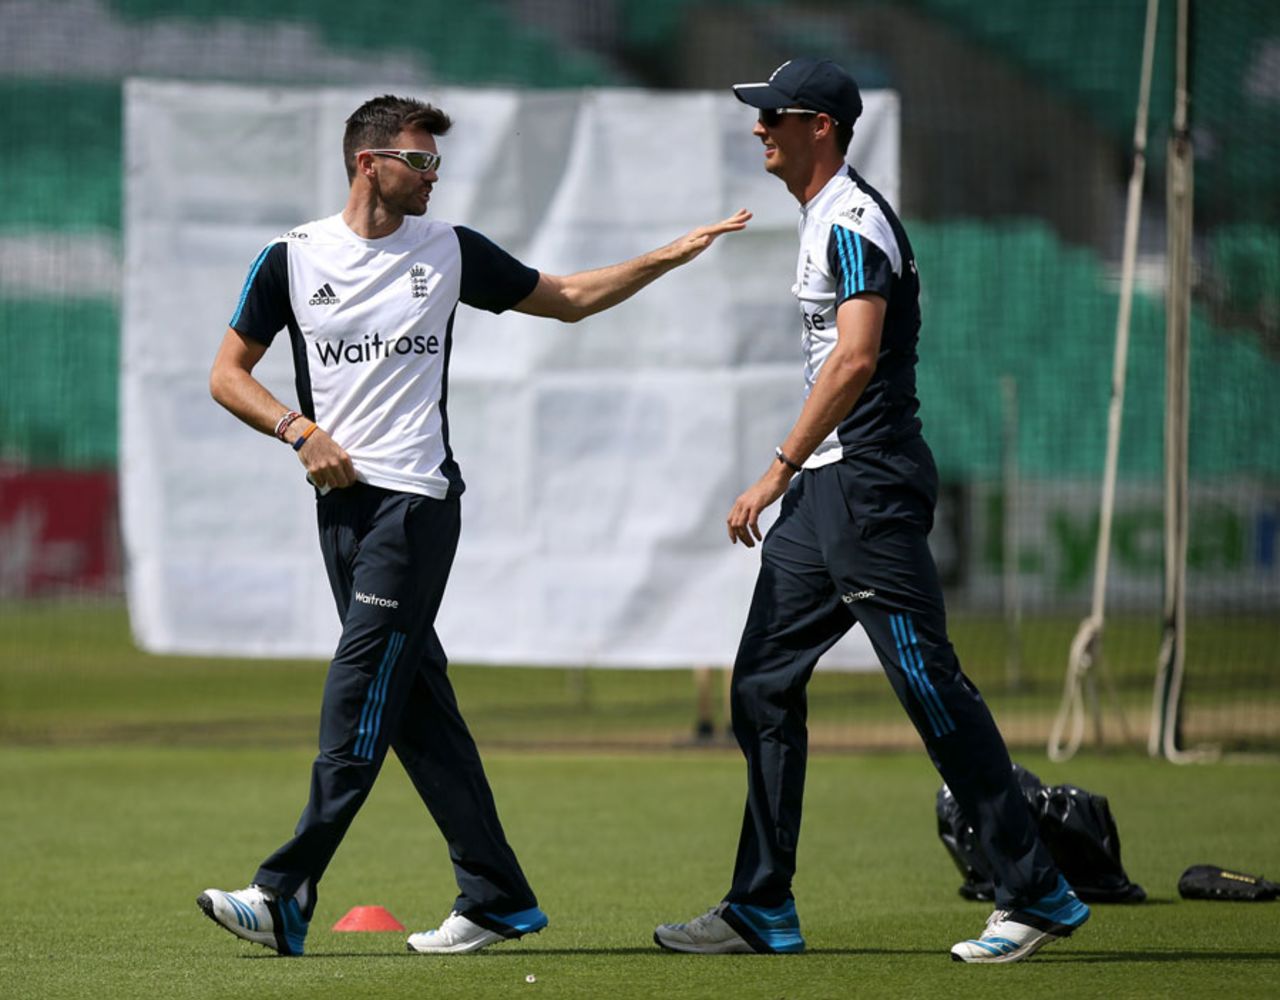 James Anderson and Steven Finn at England practice, The Oval, August 13, 2014